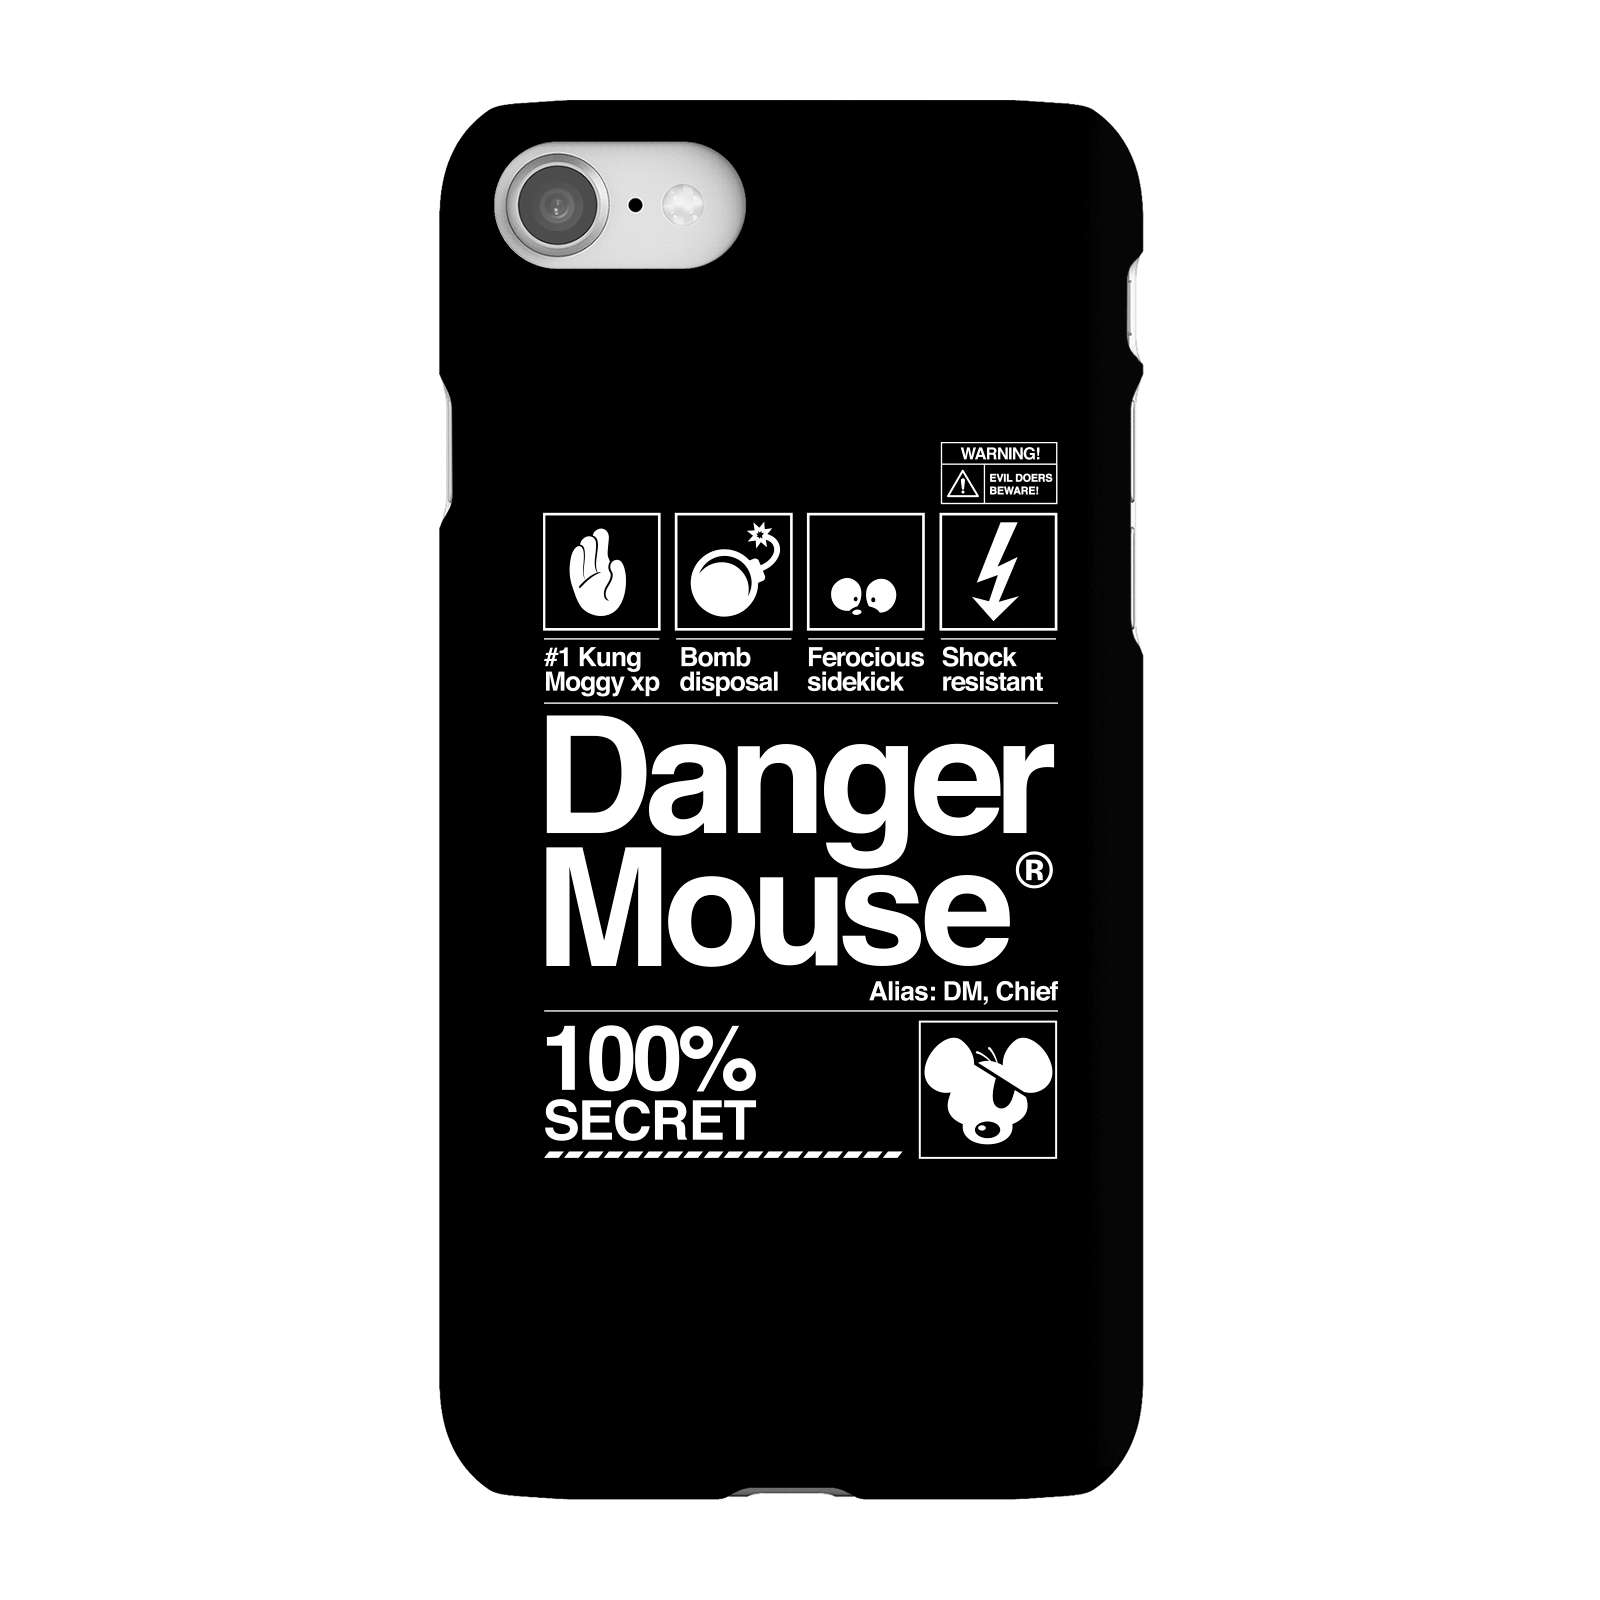 Danger Mouse 100% Secret Phone Case for iPhone and Android - iPhone 8 - Snap Case - Matte